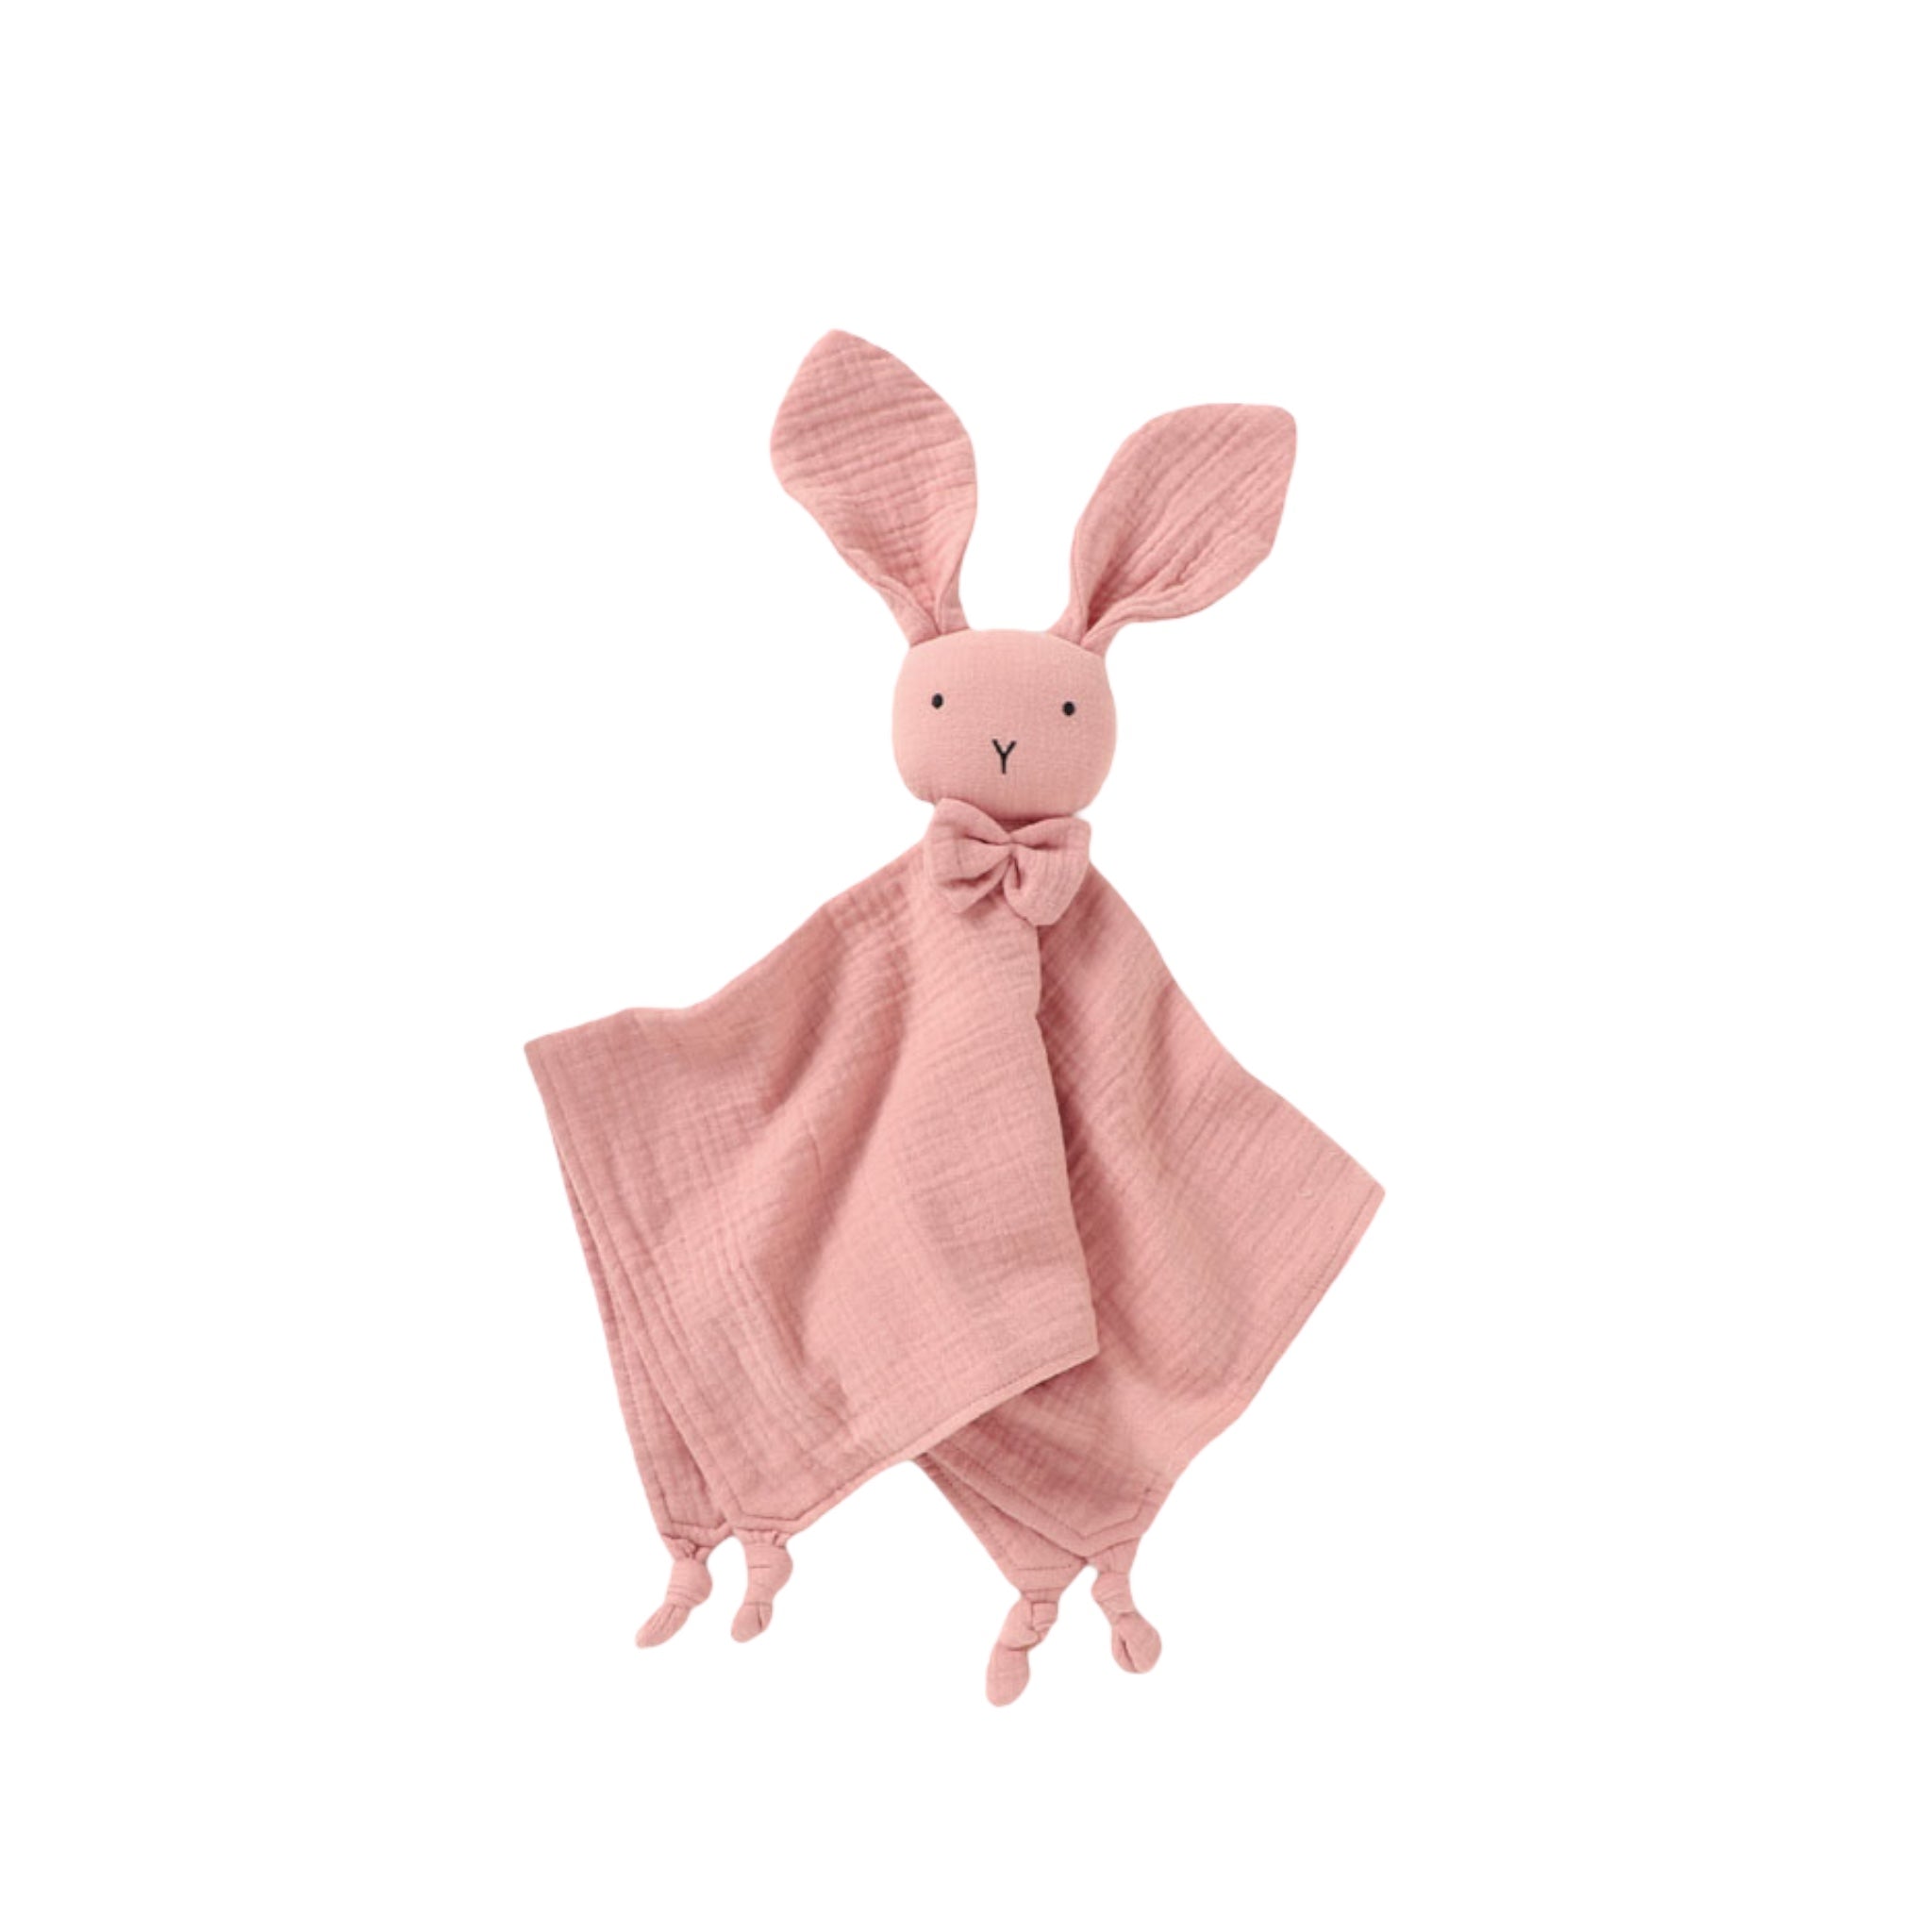 Spearmint Baby - Bunny lovies 🤍🐰 the perfect soothing blankie to